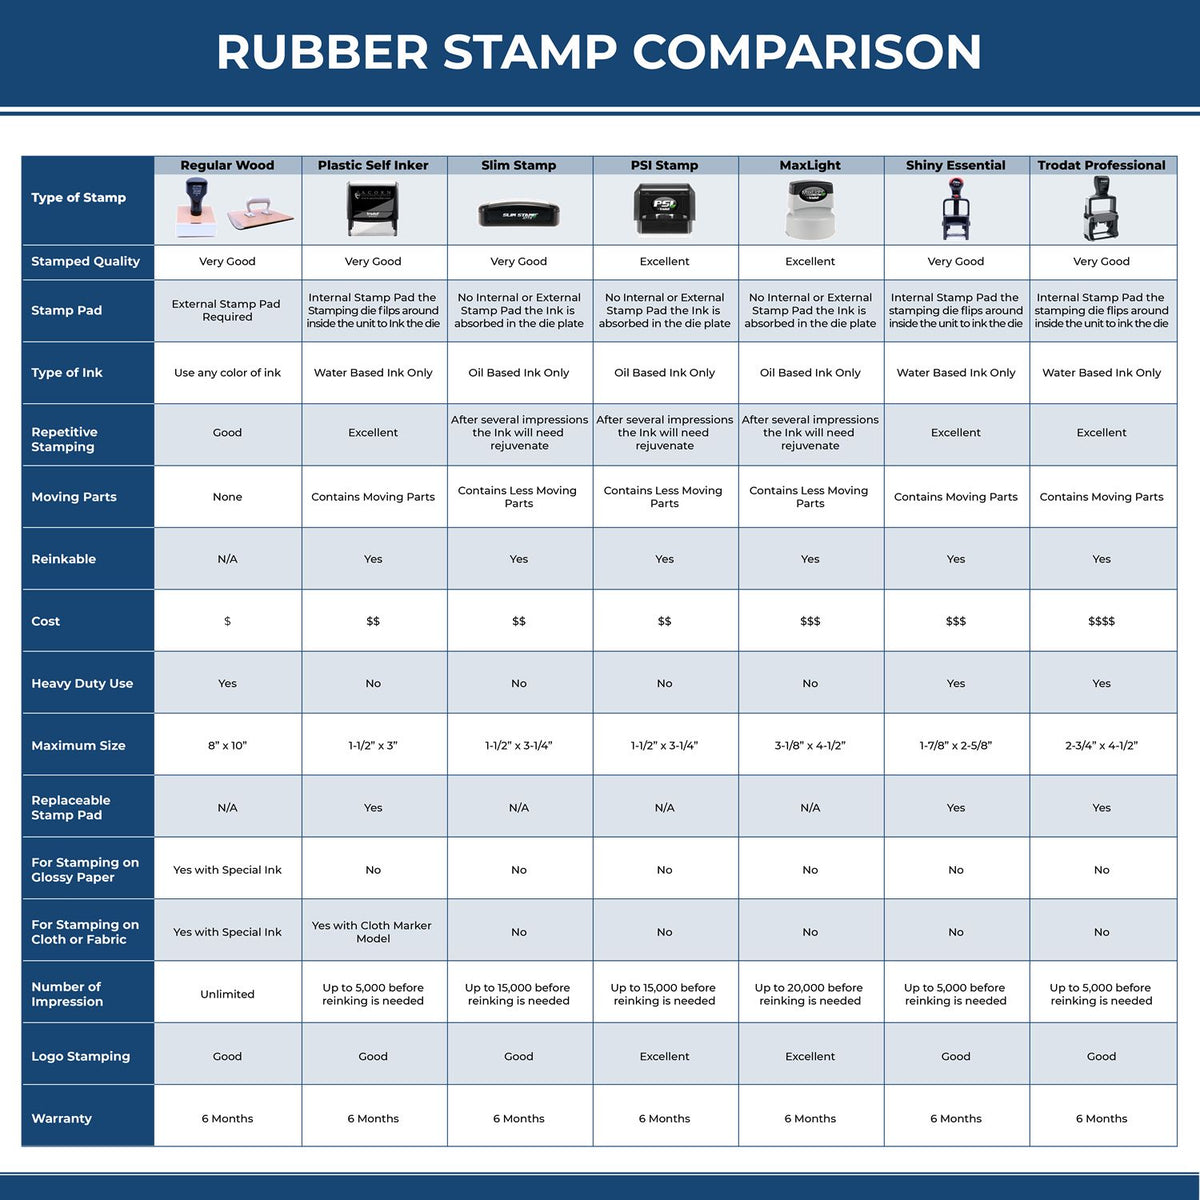 A comparison chart for the different types of mount models available for the Wooden Handle Utah State Seal Notary Public Stamp.